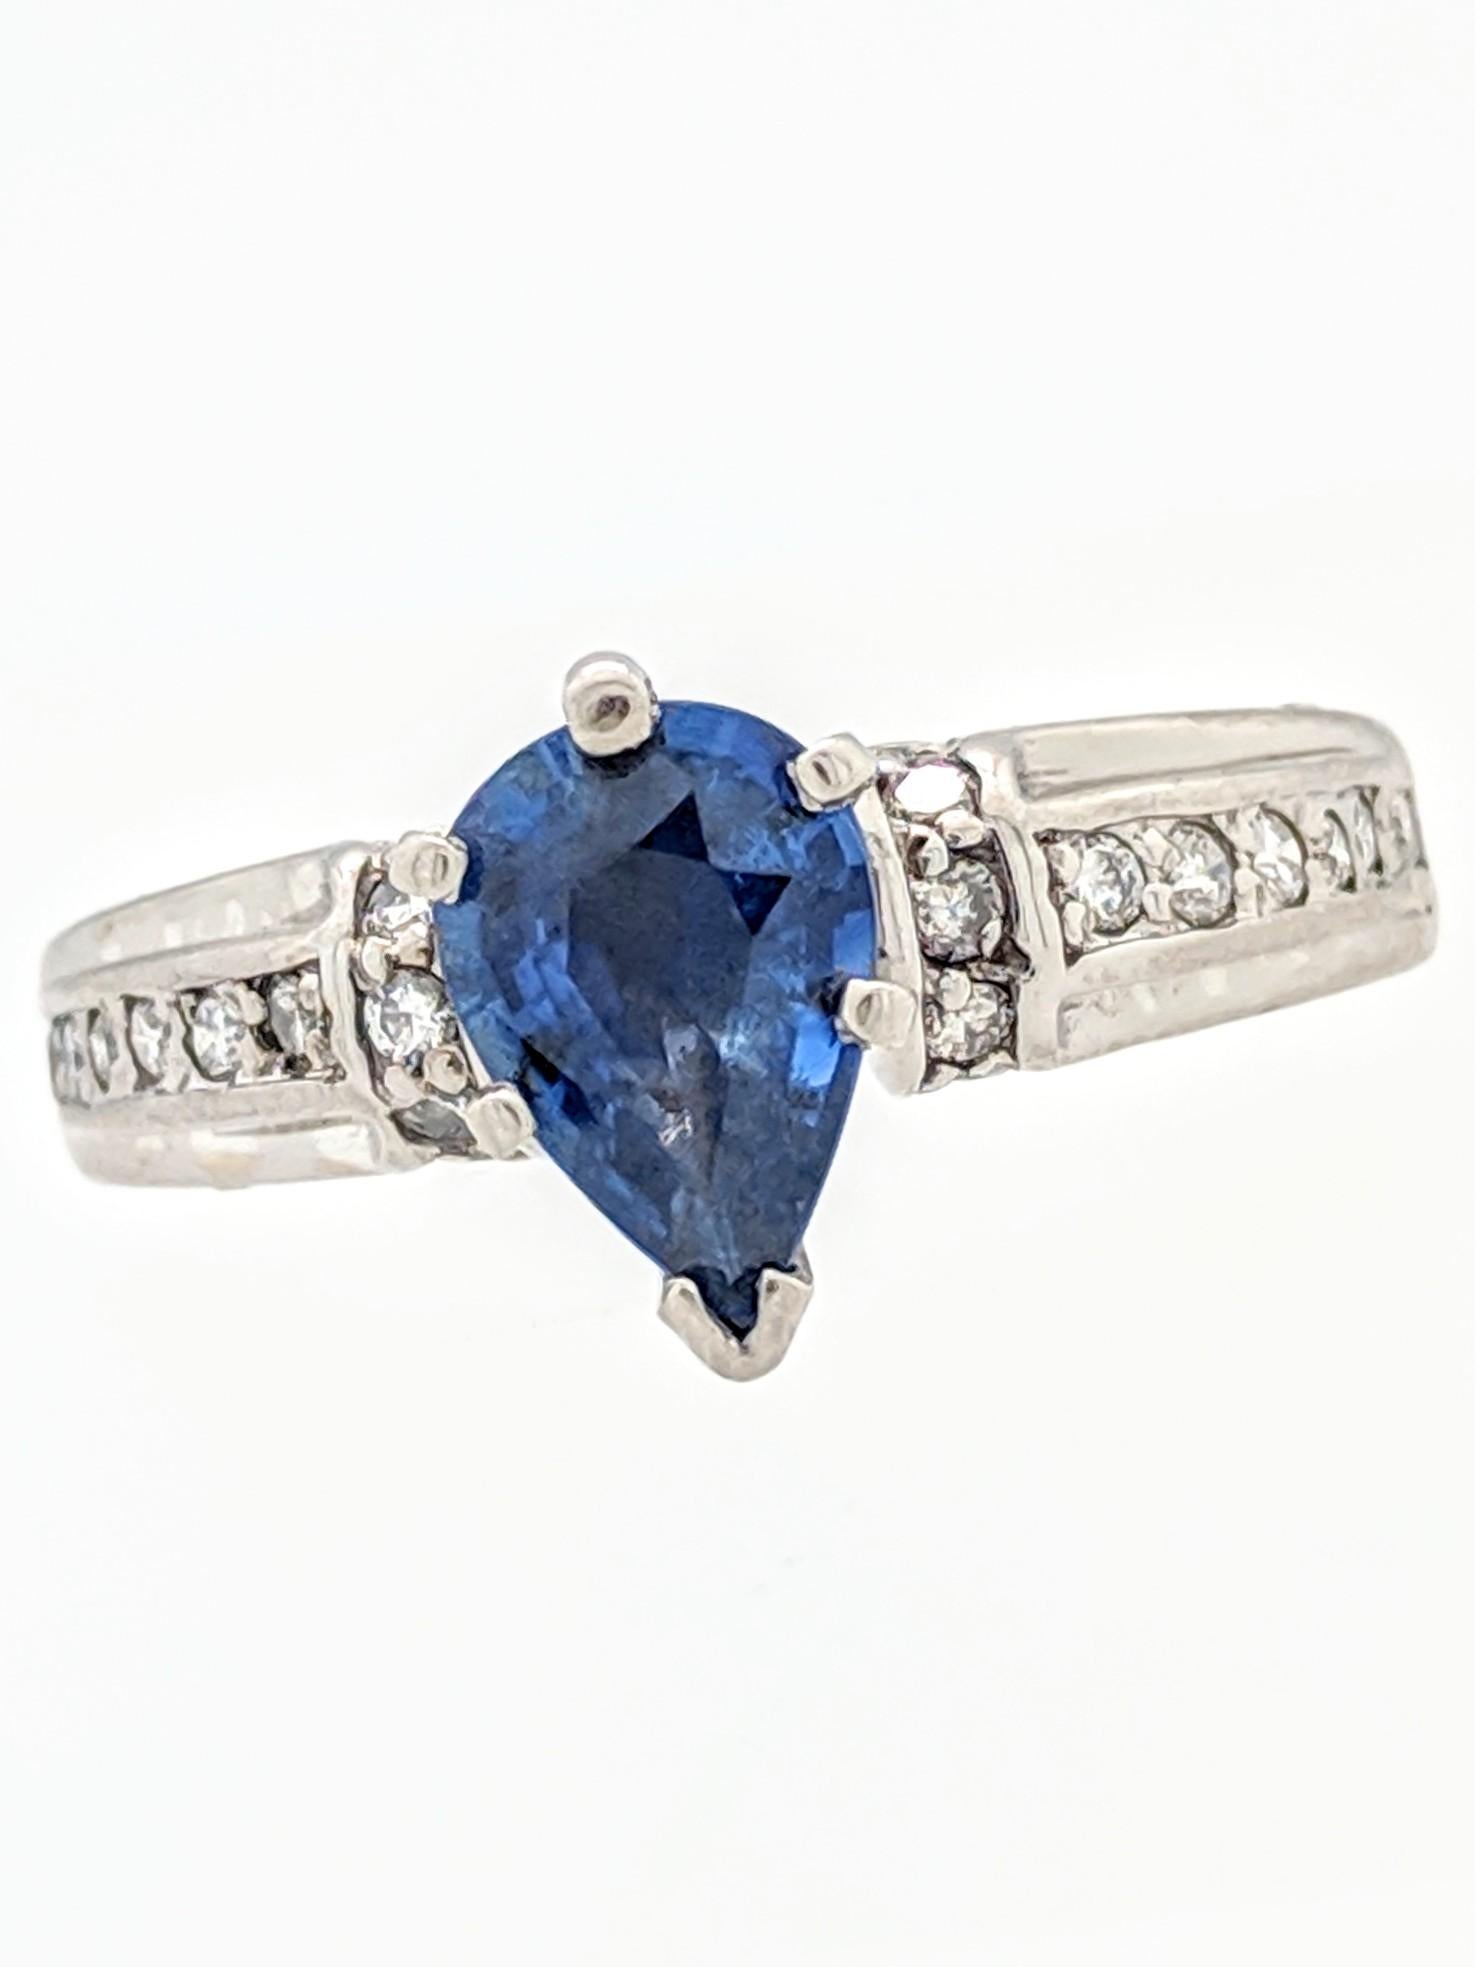  18k White Gold Sapphire & Diamond Ring

You are viewing a beautiful ladies sapphire and diamond ring.  This ring is crafted from 18k white gold and weighs 6 grams.  It features approximately (1) 1ct natural pear shaped sapphire and (48) round